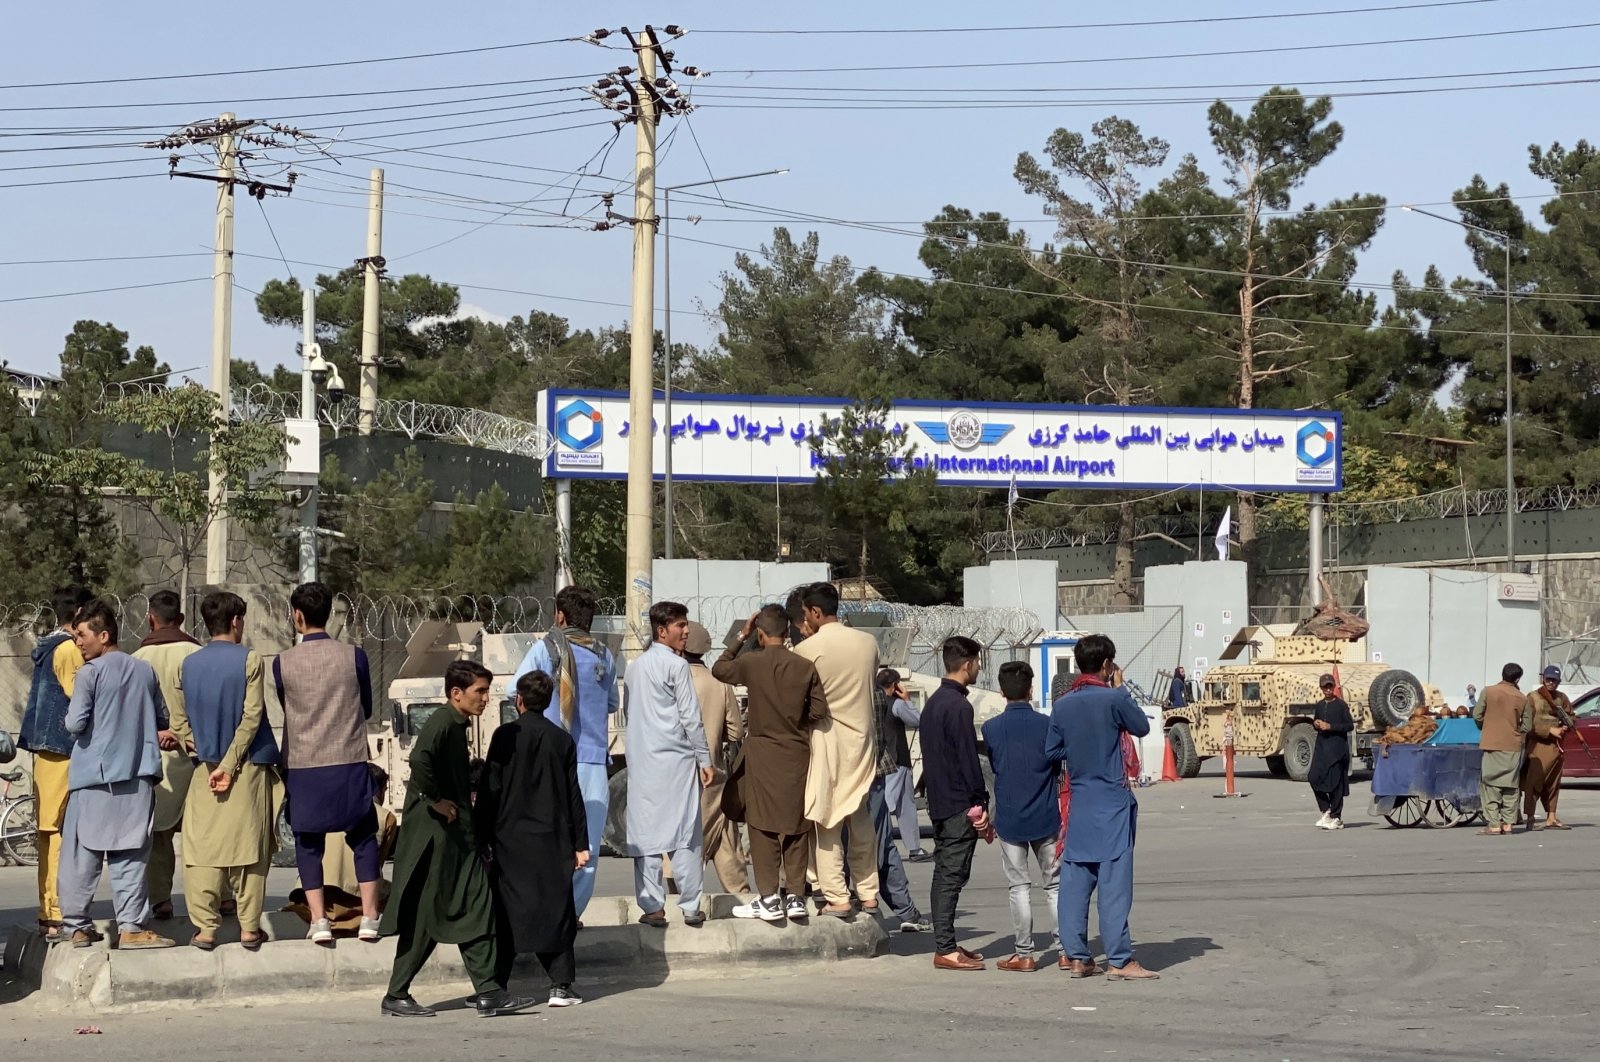 Afghans gather outside the Hamid Karzai International Airport to flee the country, in Kabul, Afghanistan, Aug. 20, 2021. (EPA Photo)